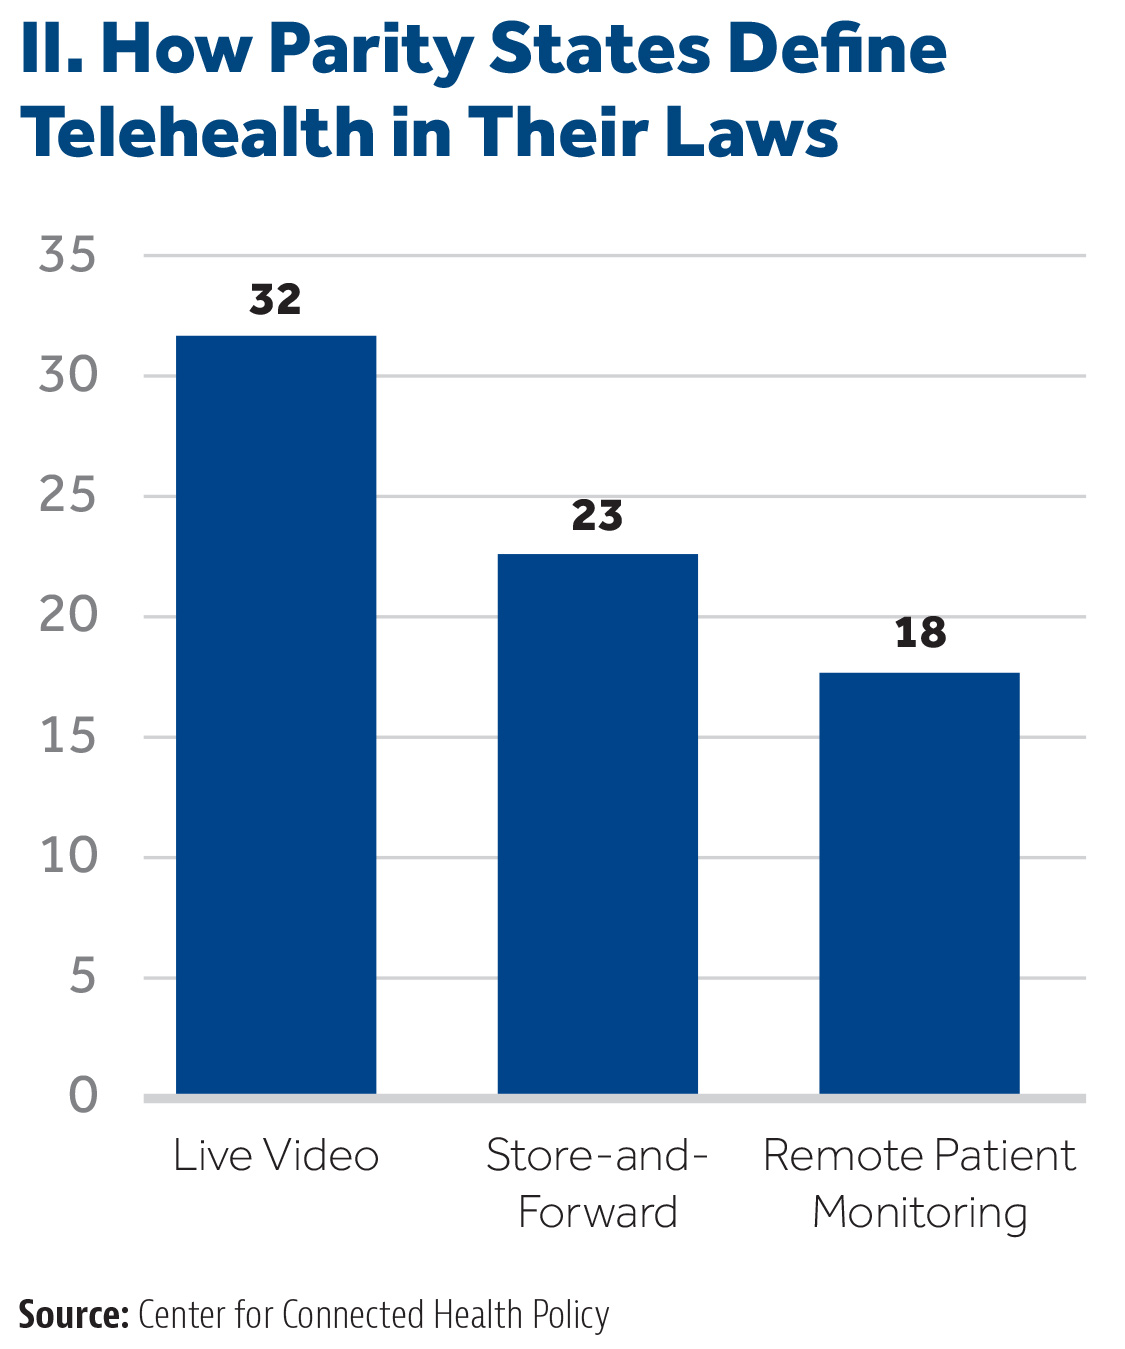 How Parity States Define Telehealth in Their Laws